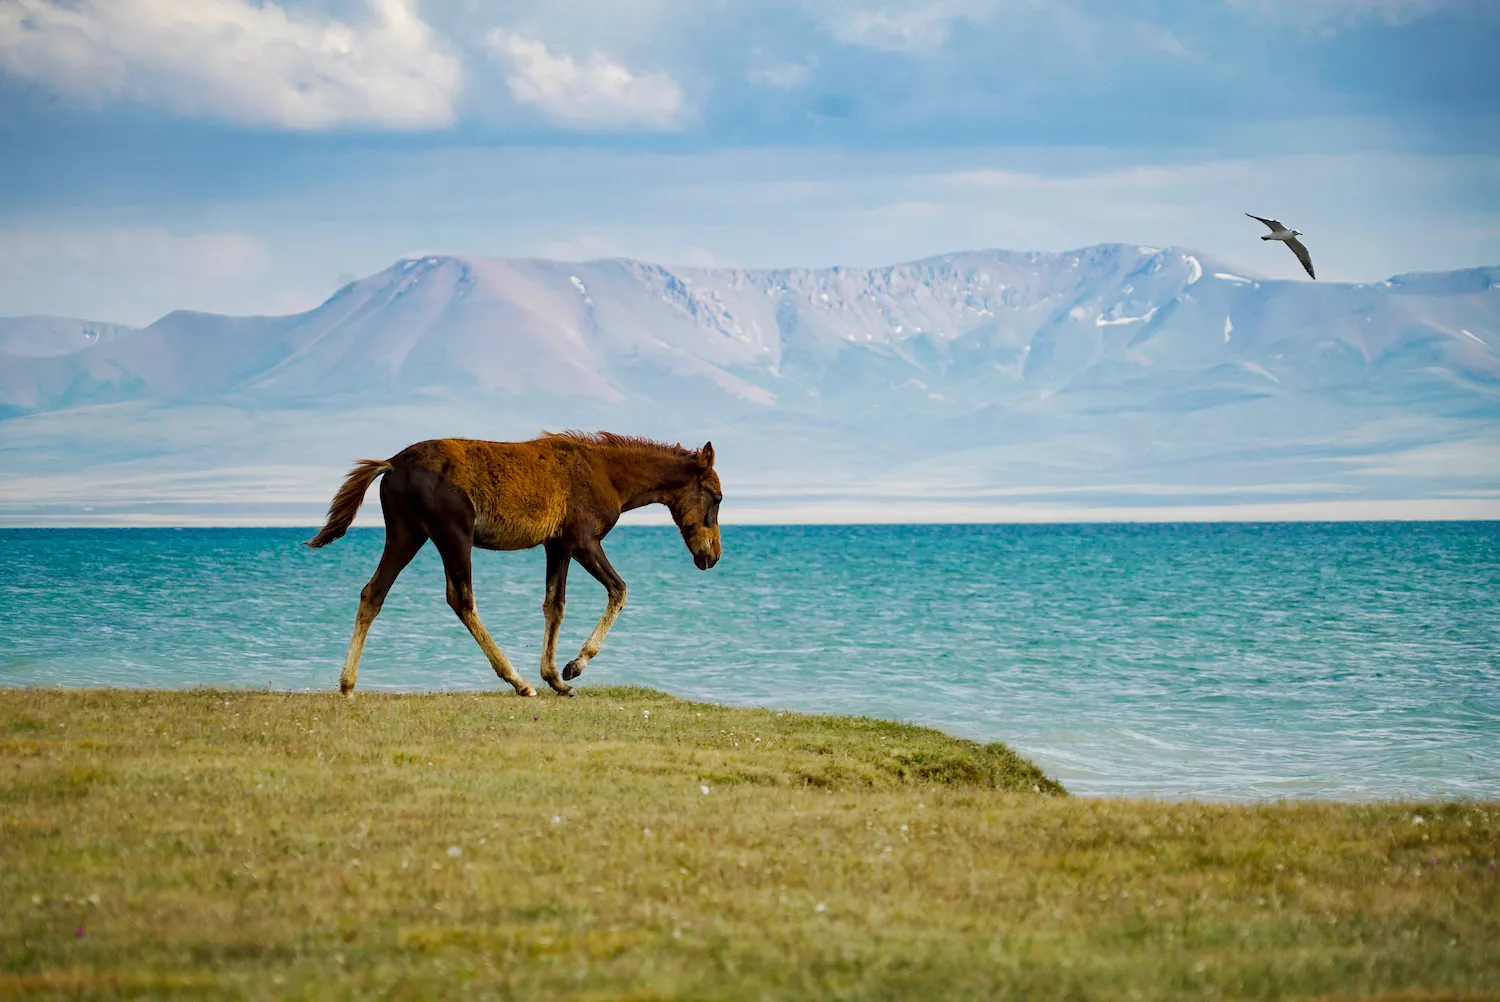 A horse trots in front of the blue waters of Song Kul on an overcast day